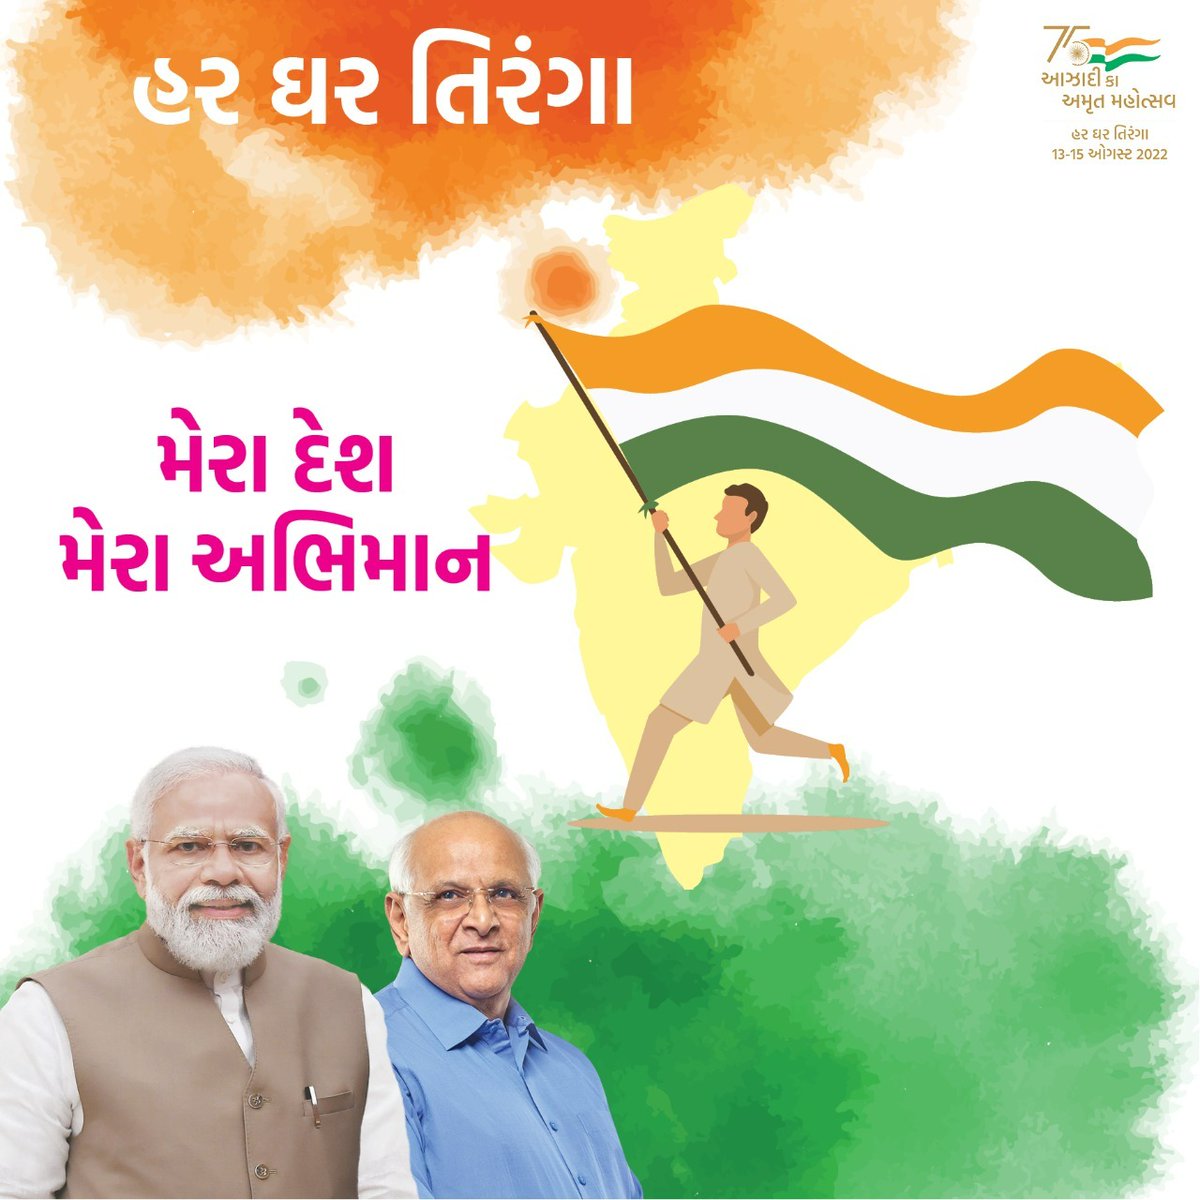 मेरा तिरंगा मेरी जान, lehraye har ghar mein, yehi hai isski shaan! In the 75th year of our independence, let's bring home our National Flag & fly it proudly from 13th to 15th August with this sentiment #HarGharTiranga @narendramodi @Bhupendrapbjp @CMOGuj @AmritMahotsav